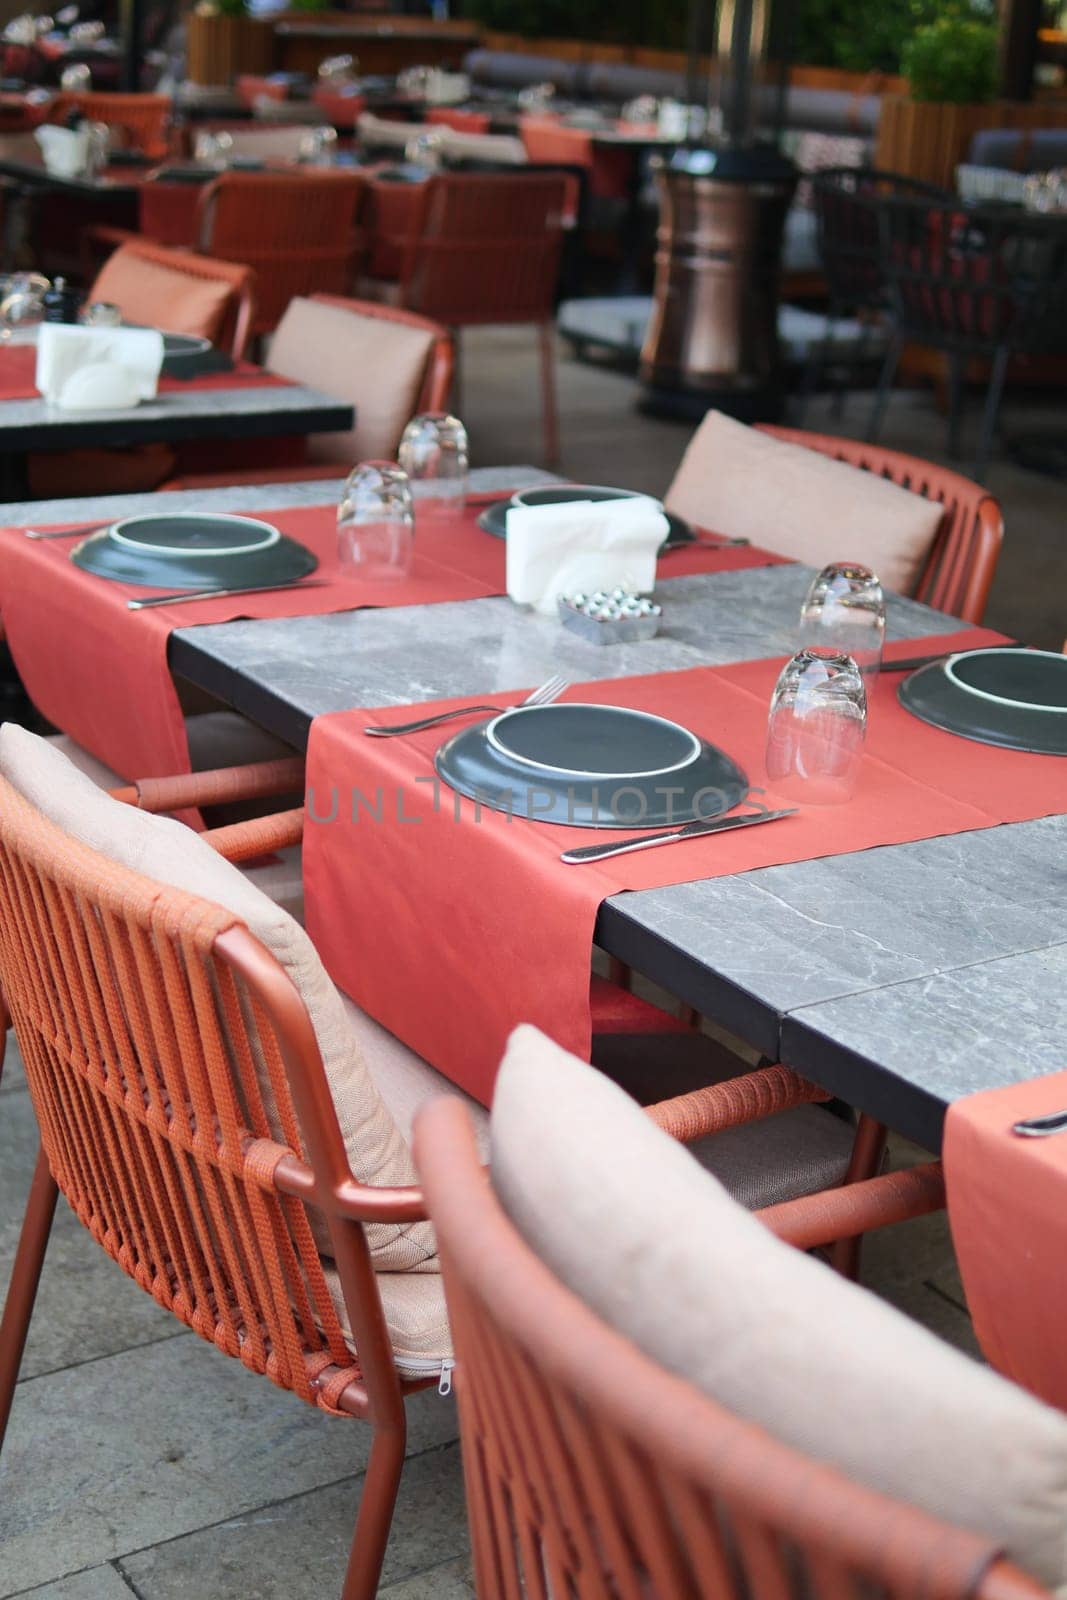 A city restaurant with orange and black outdoor furniture by towfiq007